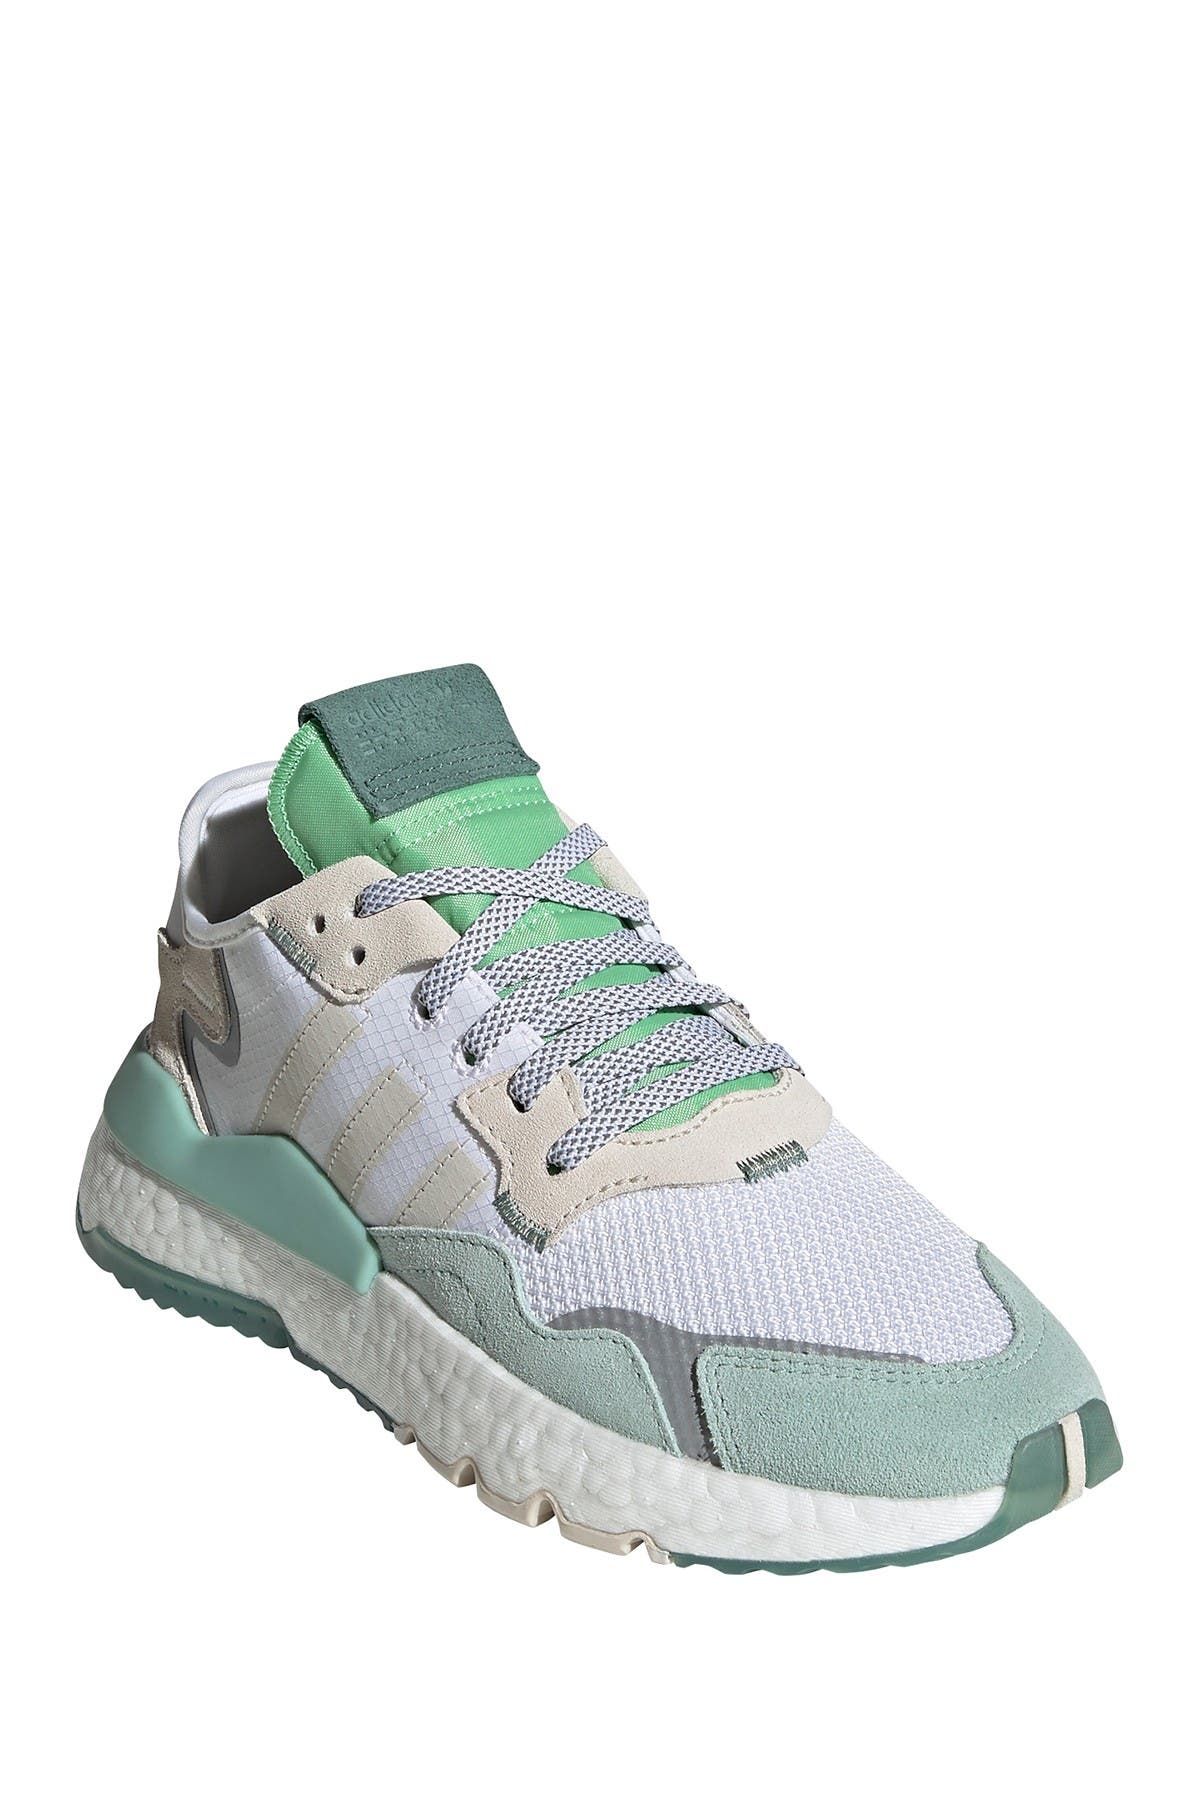 adidas nite jogger in stores